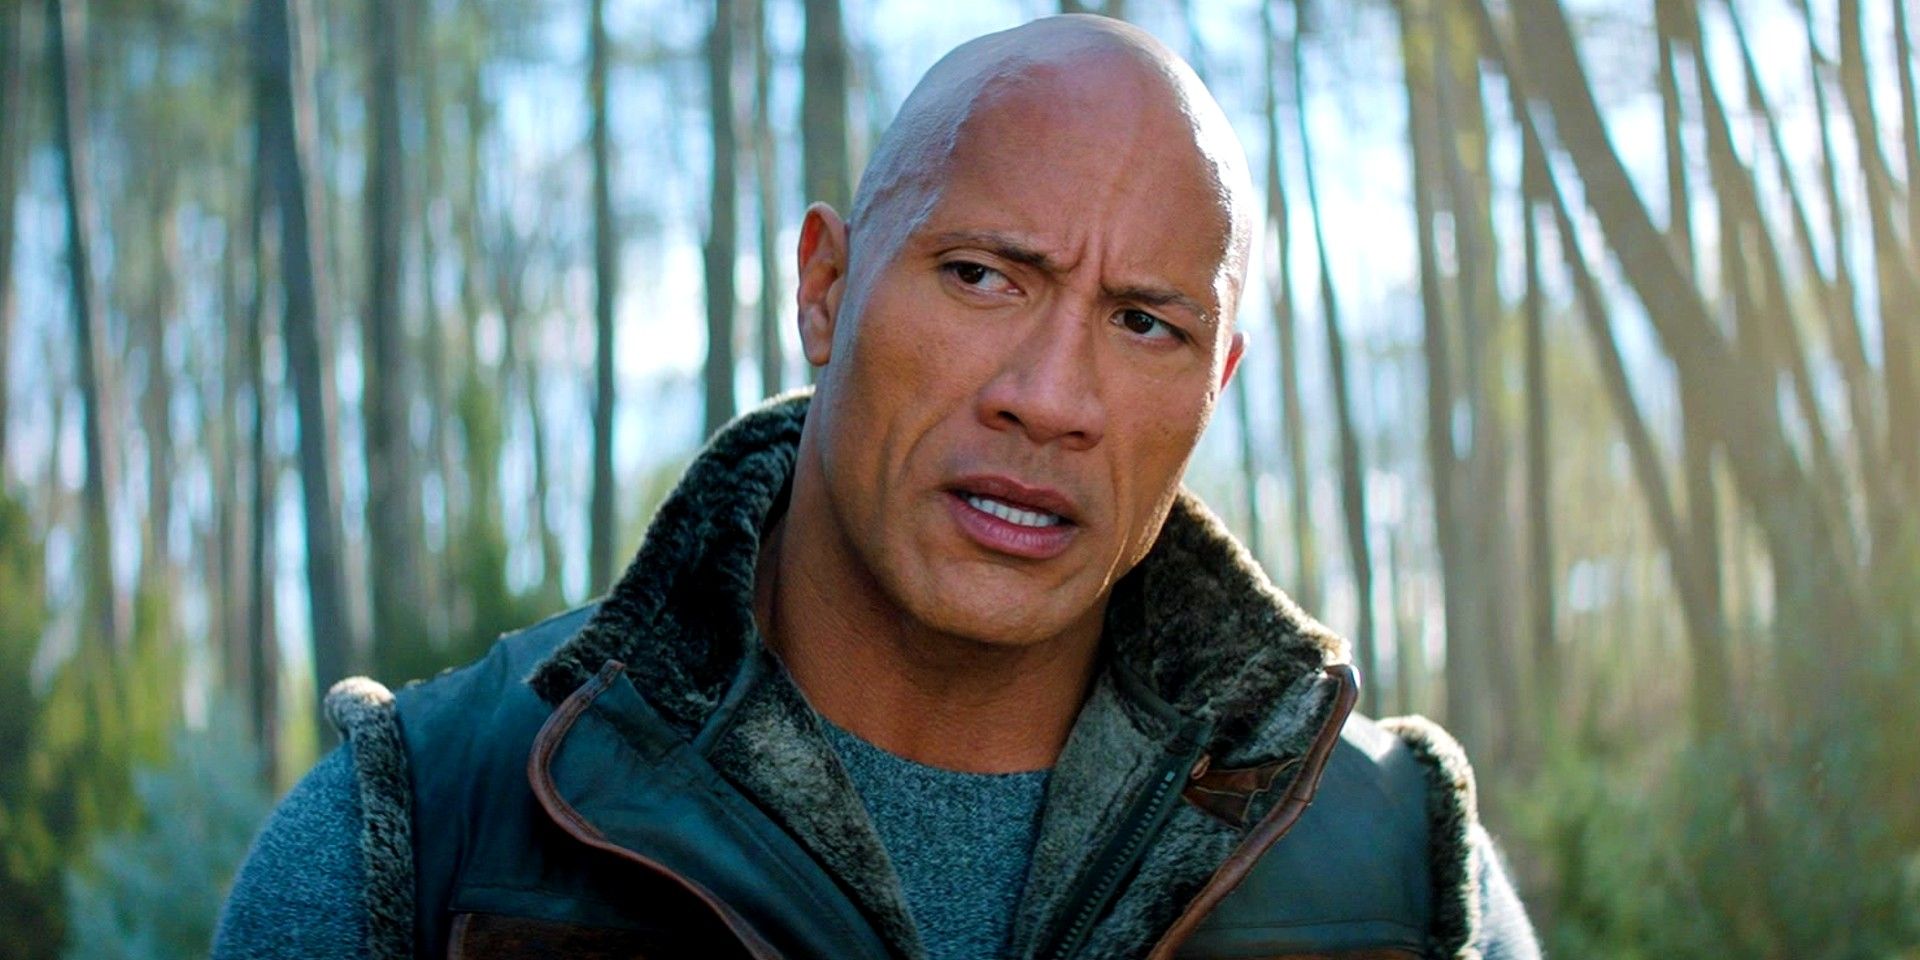 The Rock Found His Fast & Furious Replacement 6 Years Ago – So Why Is Another Sequel Taking So Long?